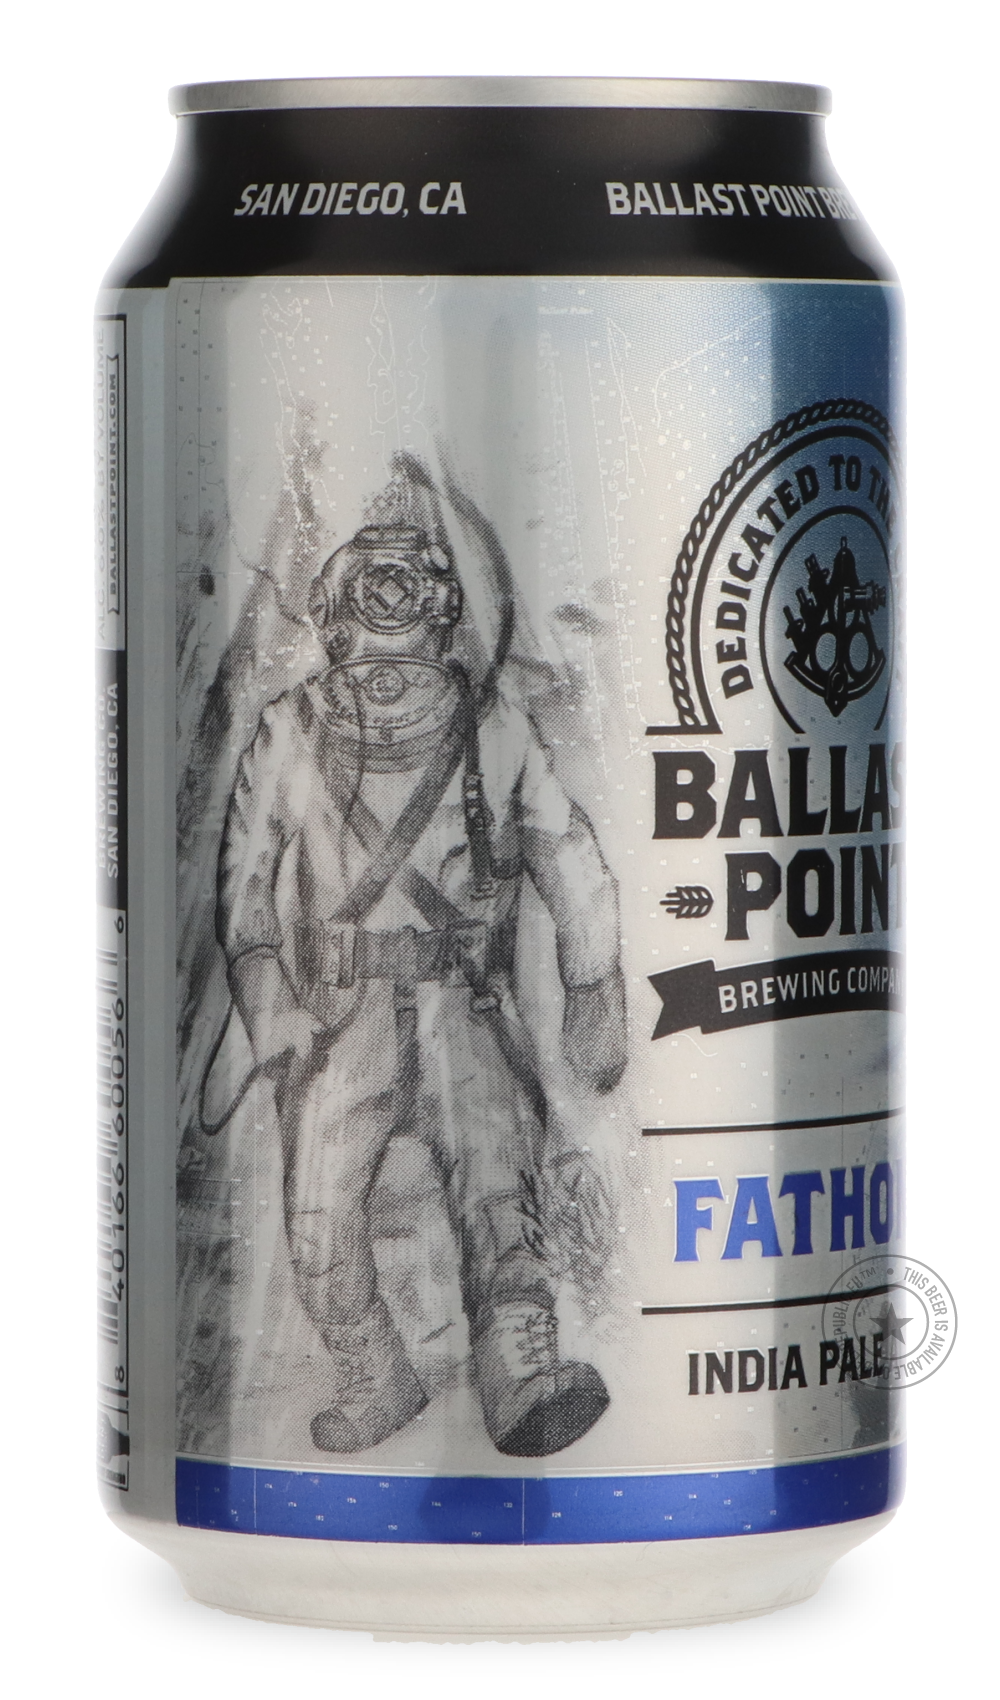 -Ballast Point- Fathom-IPA- Only @ Beer Republic - The best online beer store for American & Canadian craft beer - Buy beer online from the USA and Canada - Bier online kopen - Amerikaans bier kopen - Craft beer store - Craft beer kopen - Amerikanisch bier kaufen - Bier online kaufen - Acheter biere online - IPA - Stout - Porter - New England IPA - Hazy IPA - Imperial Stout - Barrel Aged - Barrel Aged Imperial Stout - Brown - Dark beer - Blond - Blonde - Pilsner - Lager - Wheat - Weizen - Amber - Barley Win